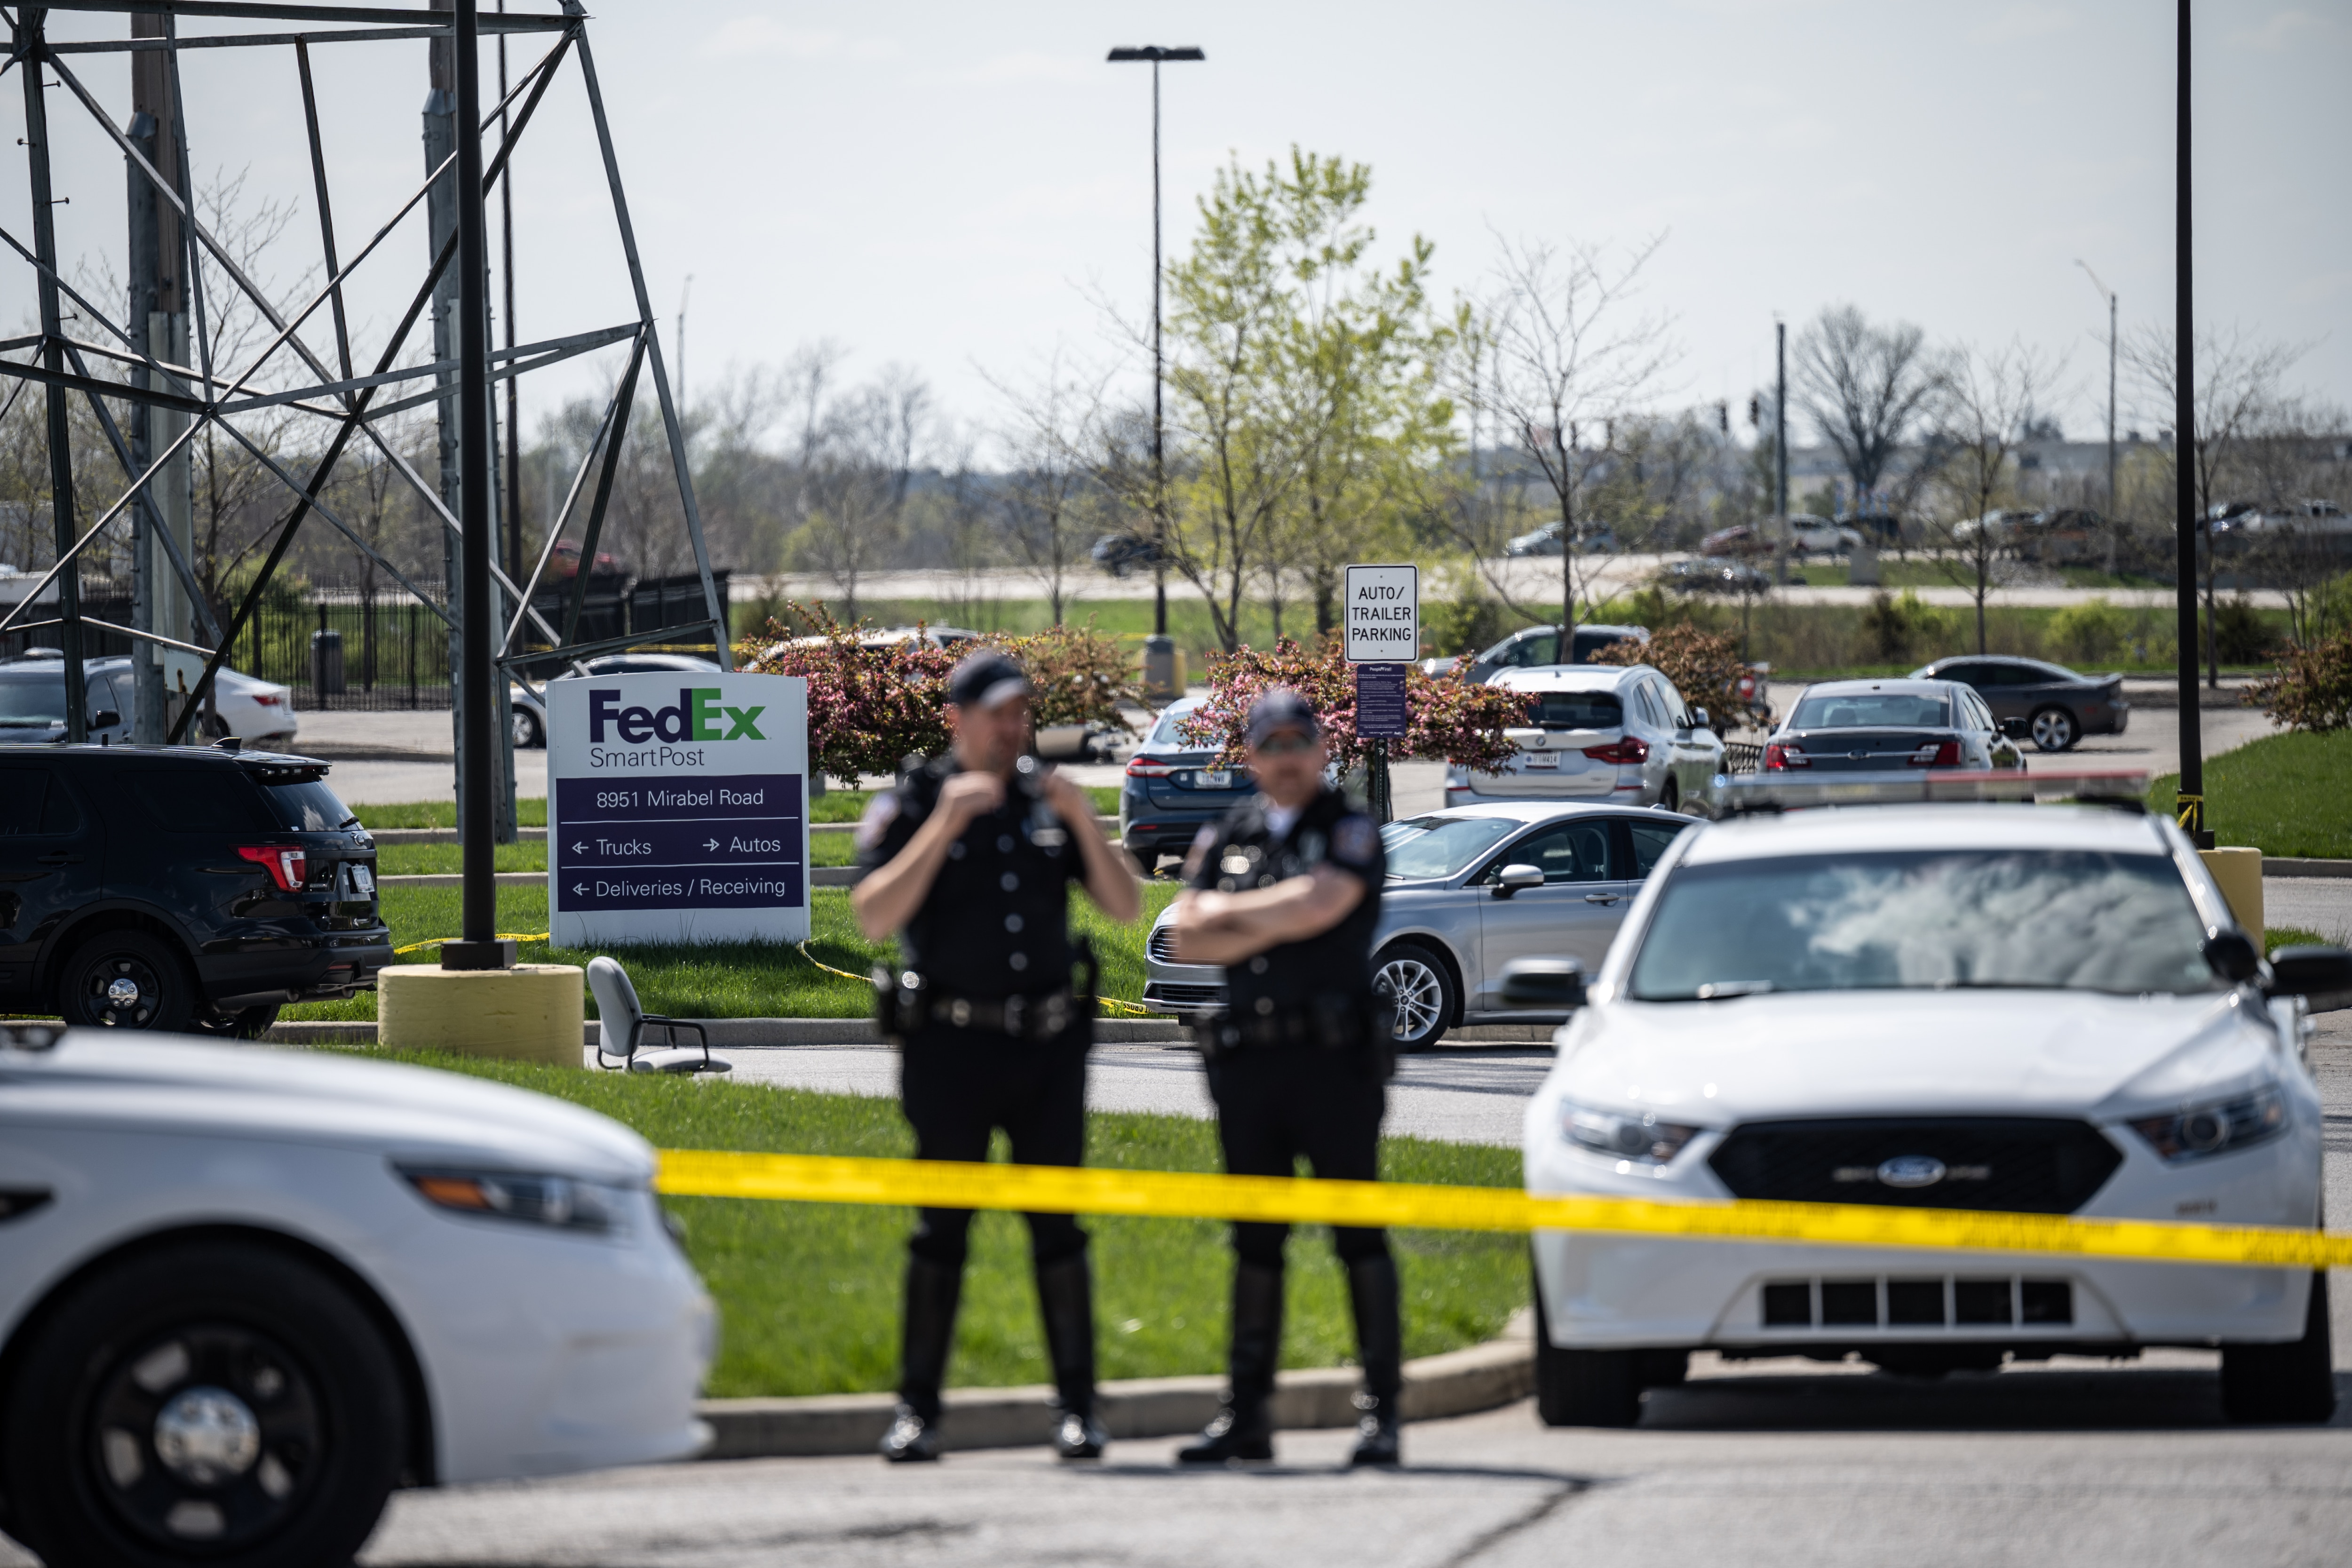 Police officers stand behind caution tape near the scene of the Indianapolis shooting on 16 April, 2021.